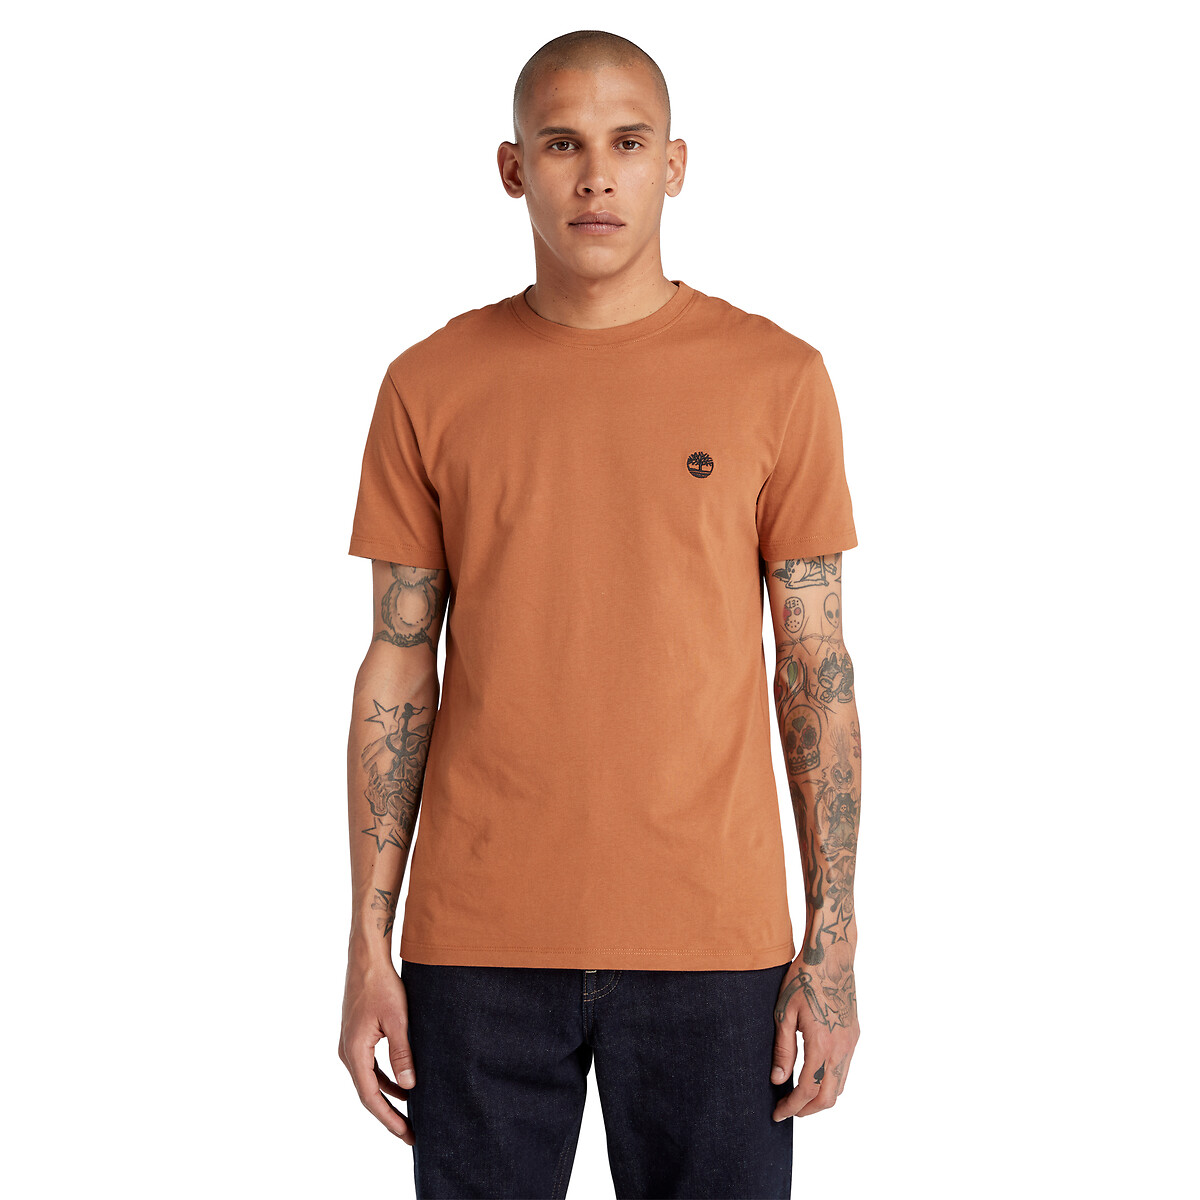 Dunstan River Cotton T-Shirt in Slim Fit with Crew Neck